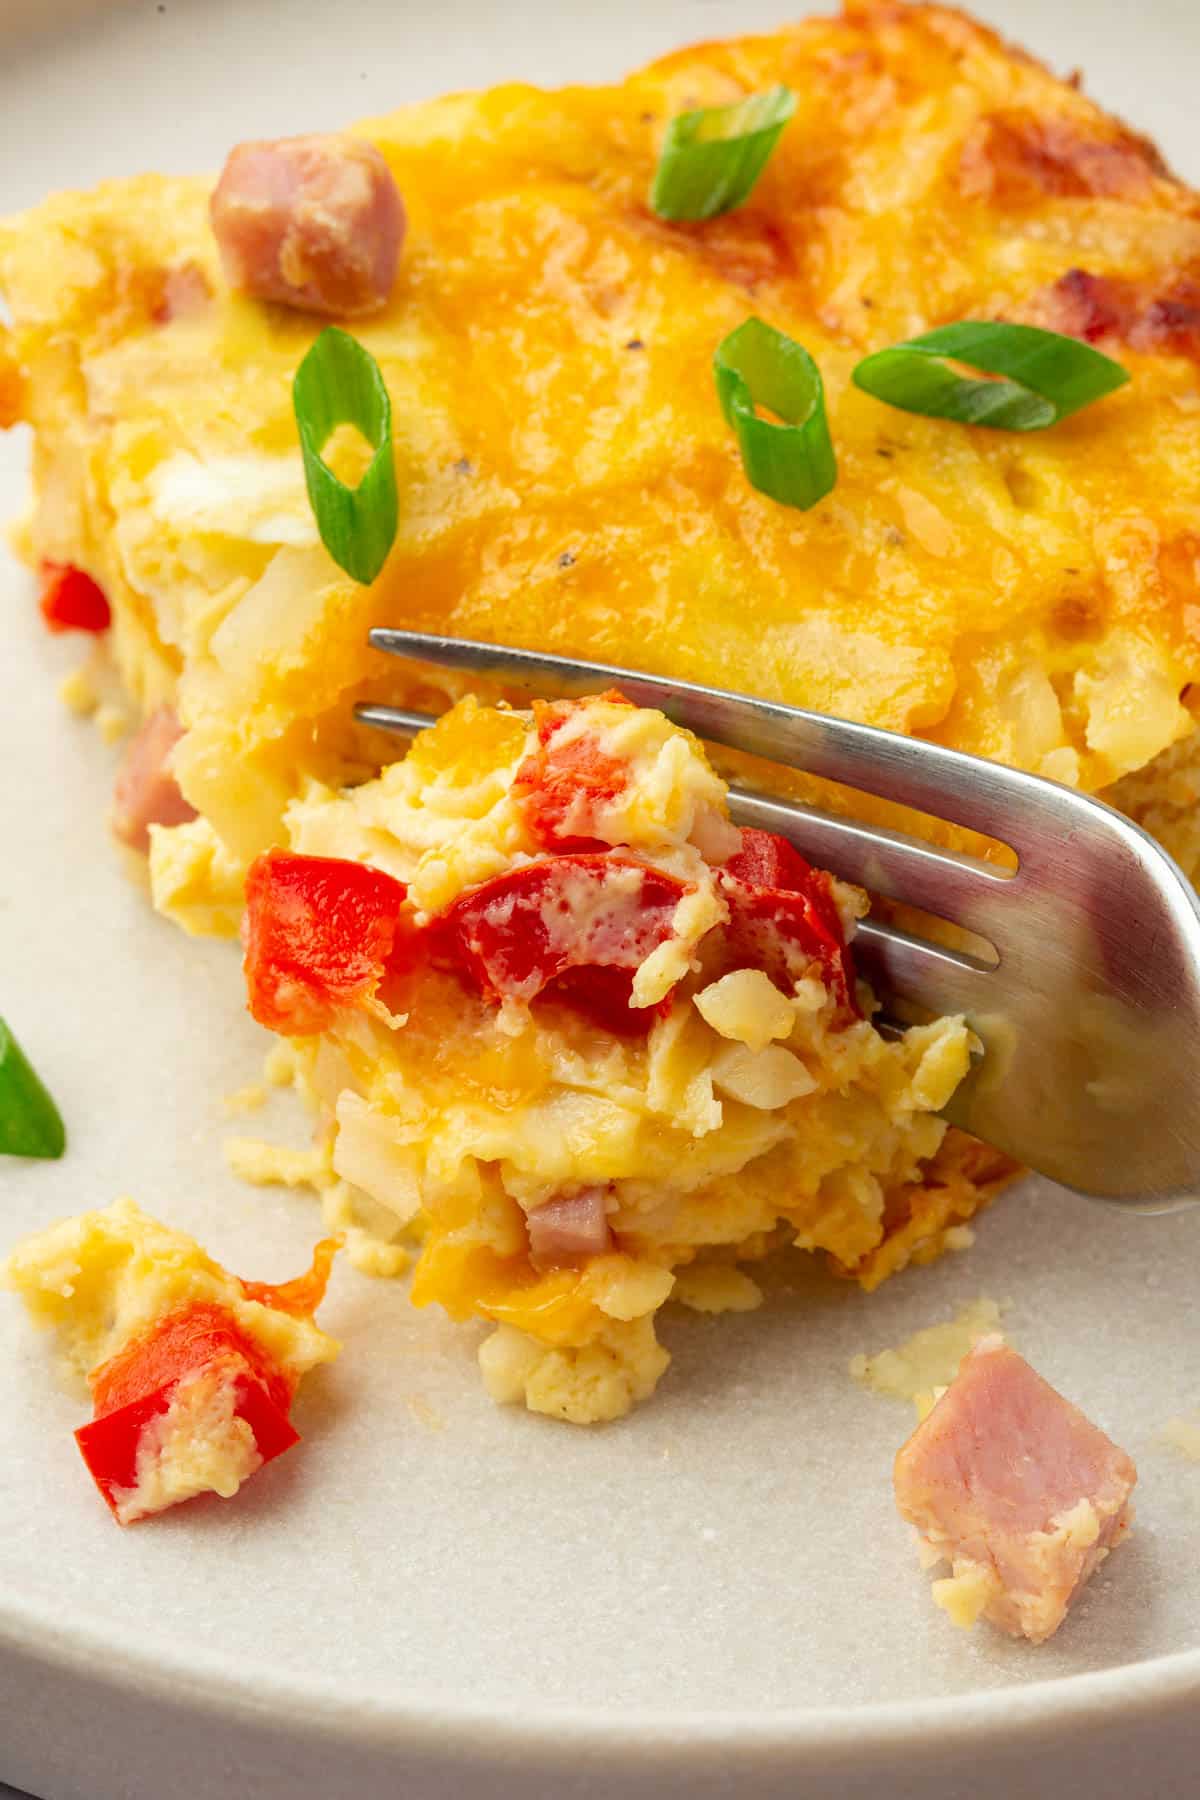 A fork cutting into a slice of gf breakfast casserole with ham, red bell pepper, and green onions.